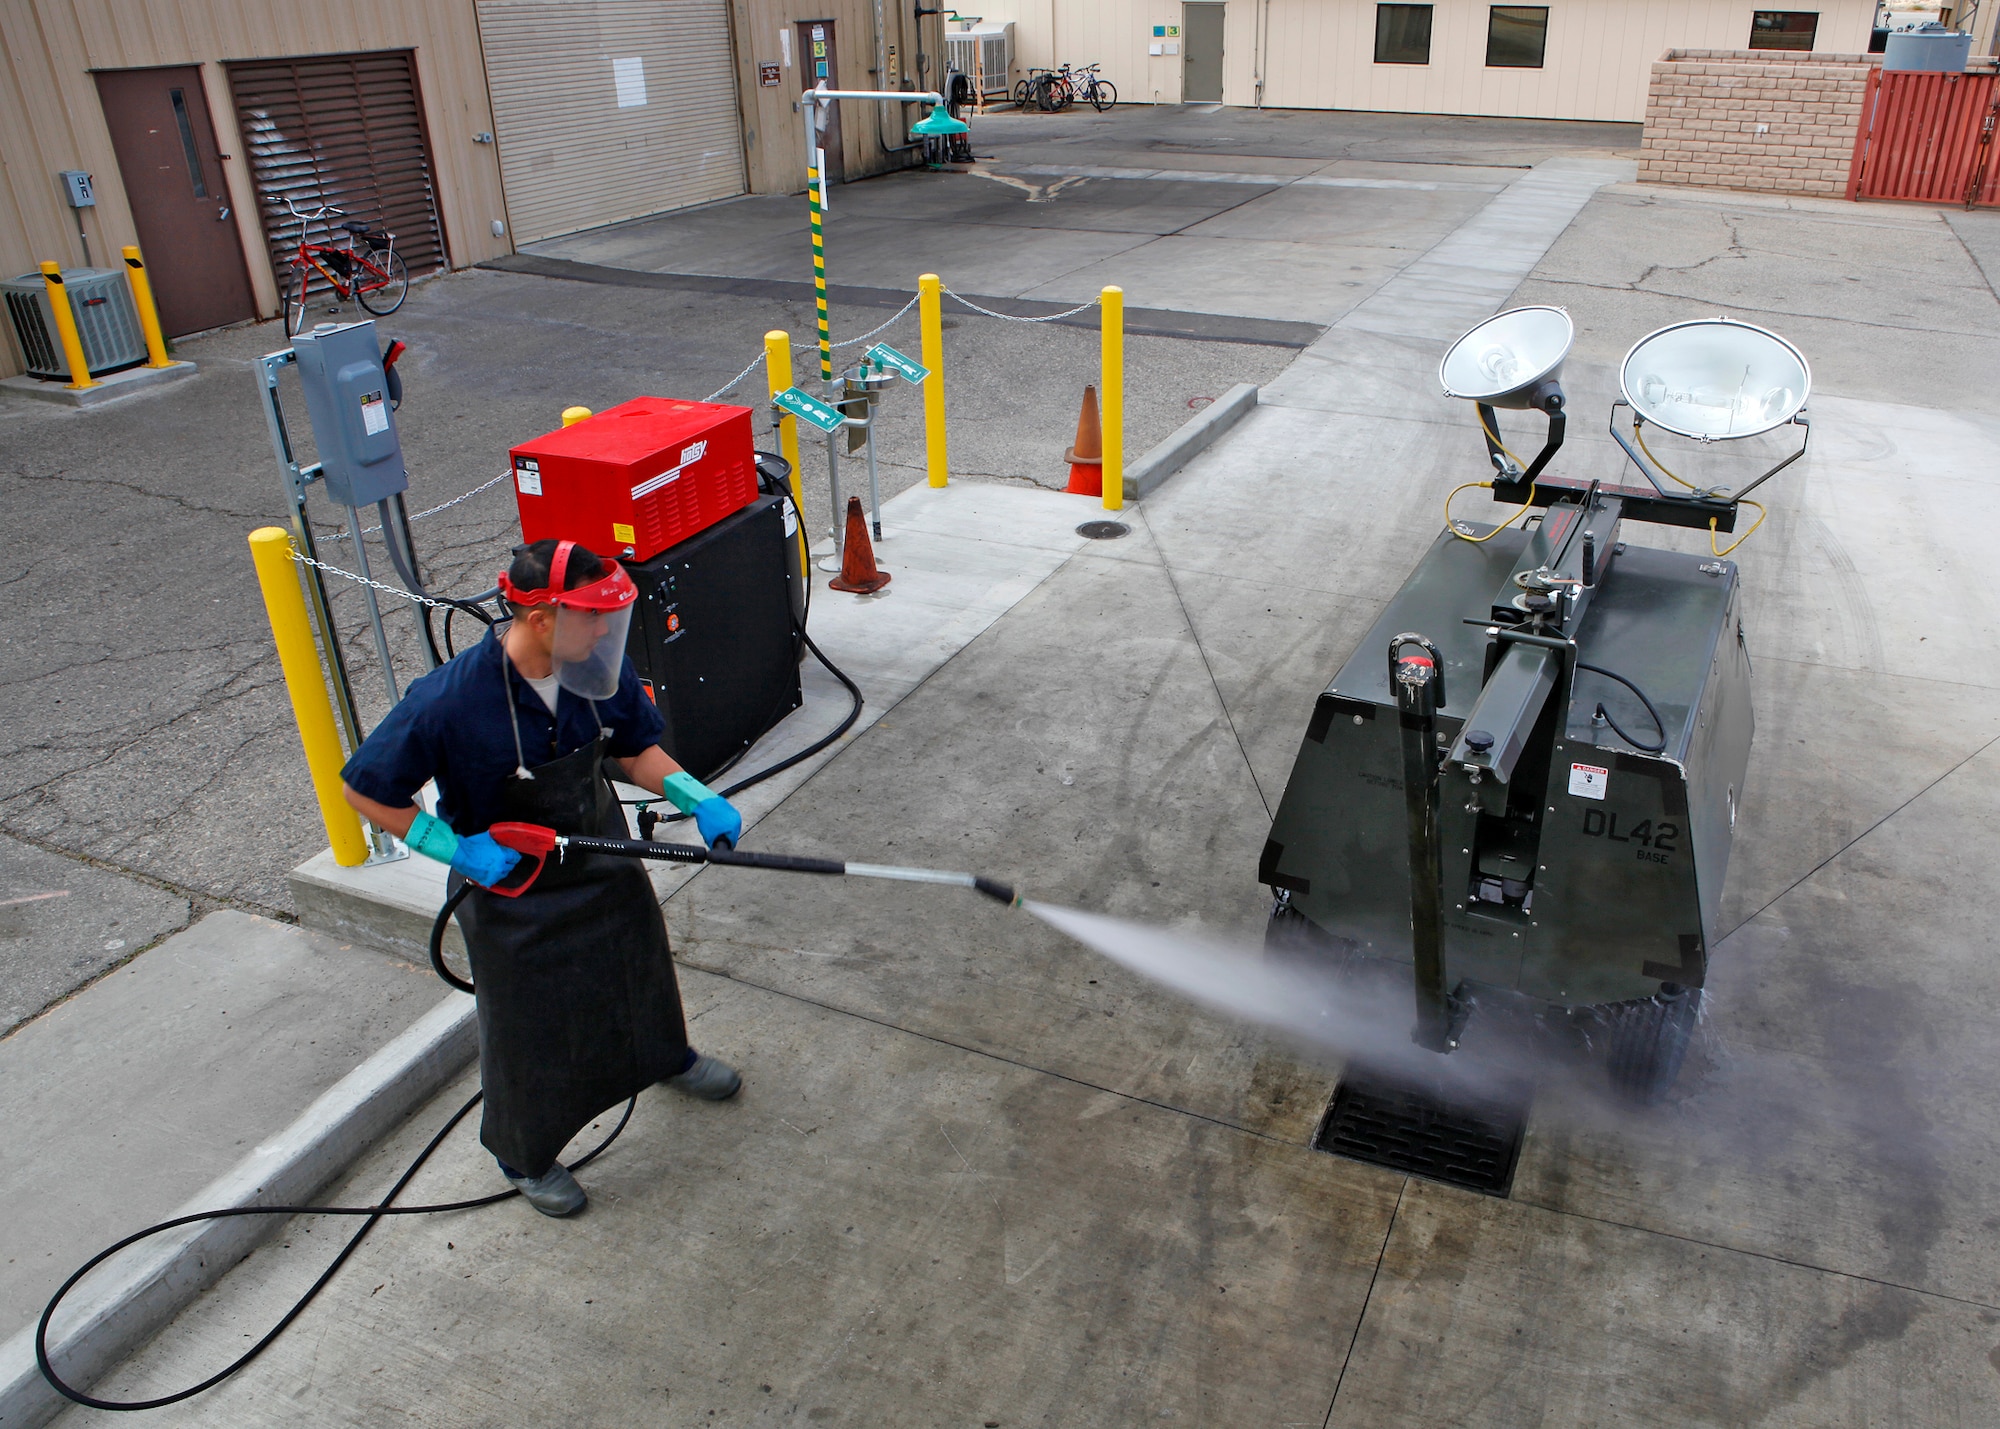 412th MXS improves its AGE'd facilities > Edwards Air Force Base ...